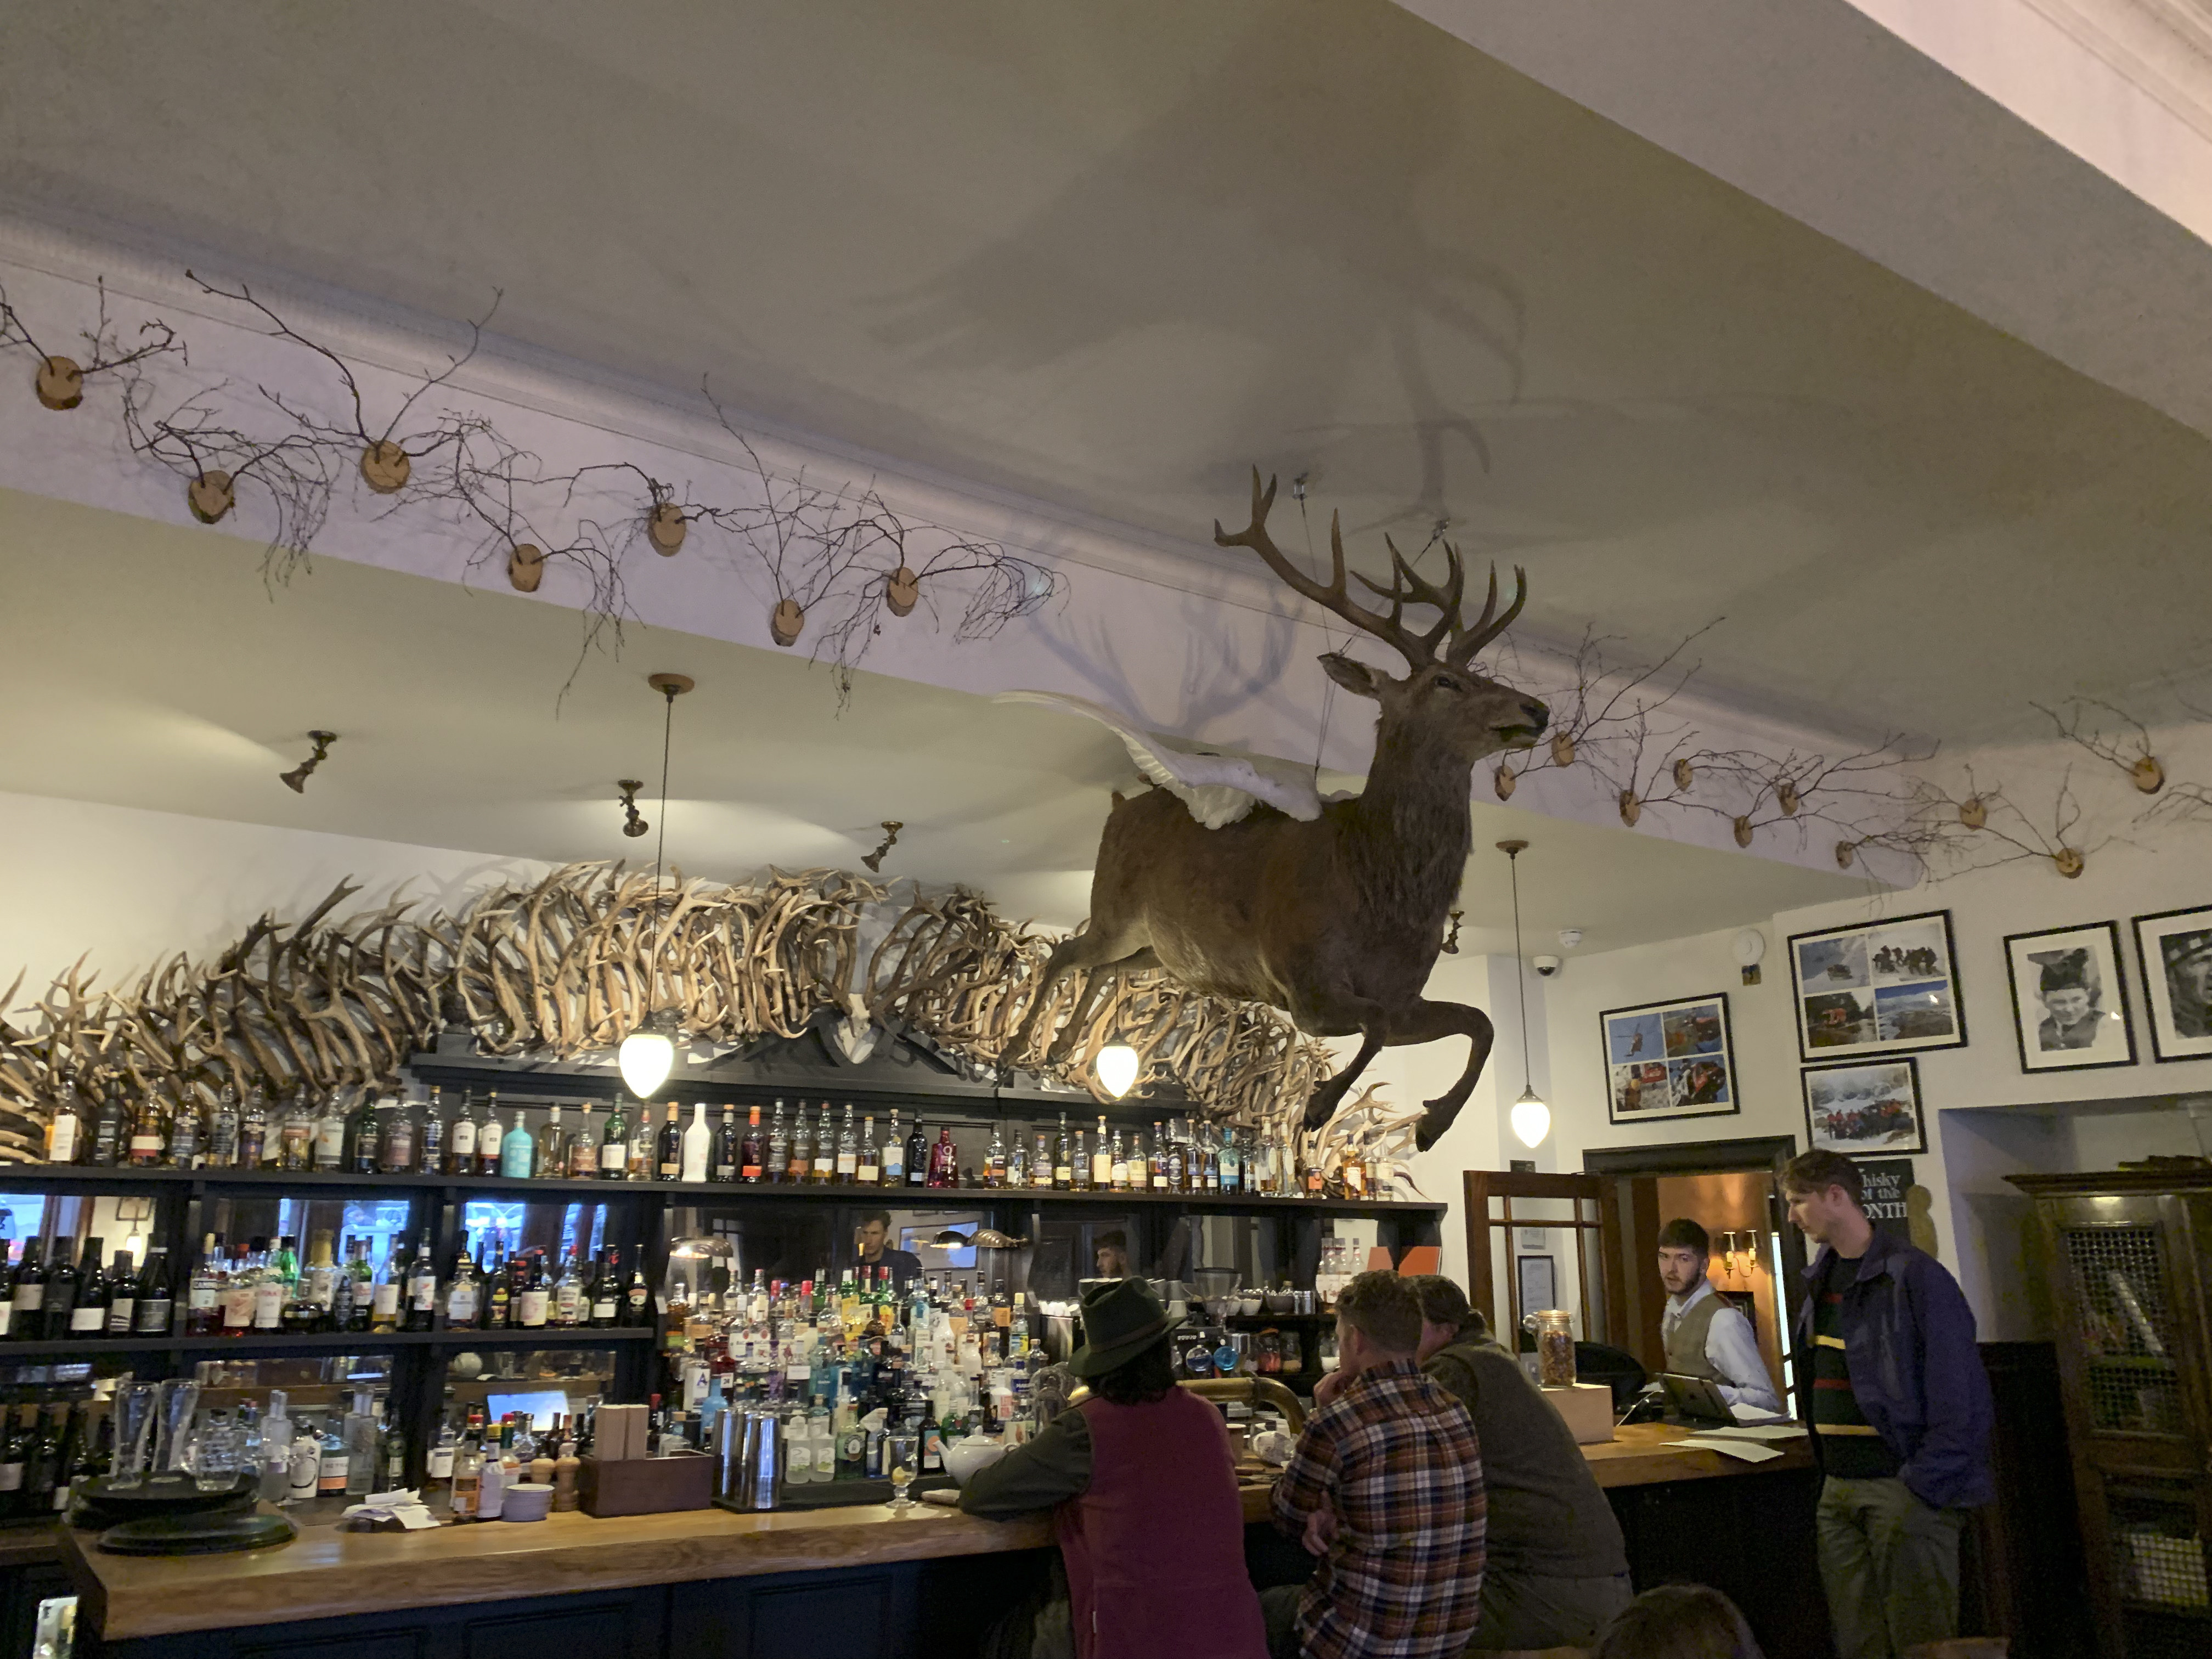 A flying stag above the bar at The Fife Arms hunting lodge in Braemar, Scotland, quirky accommodation designed by Russell Sage that’s a stone’s throw from the royal Balmoral Estate. Photo: Lee Cobaj